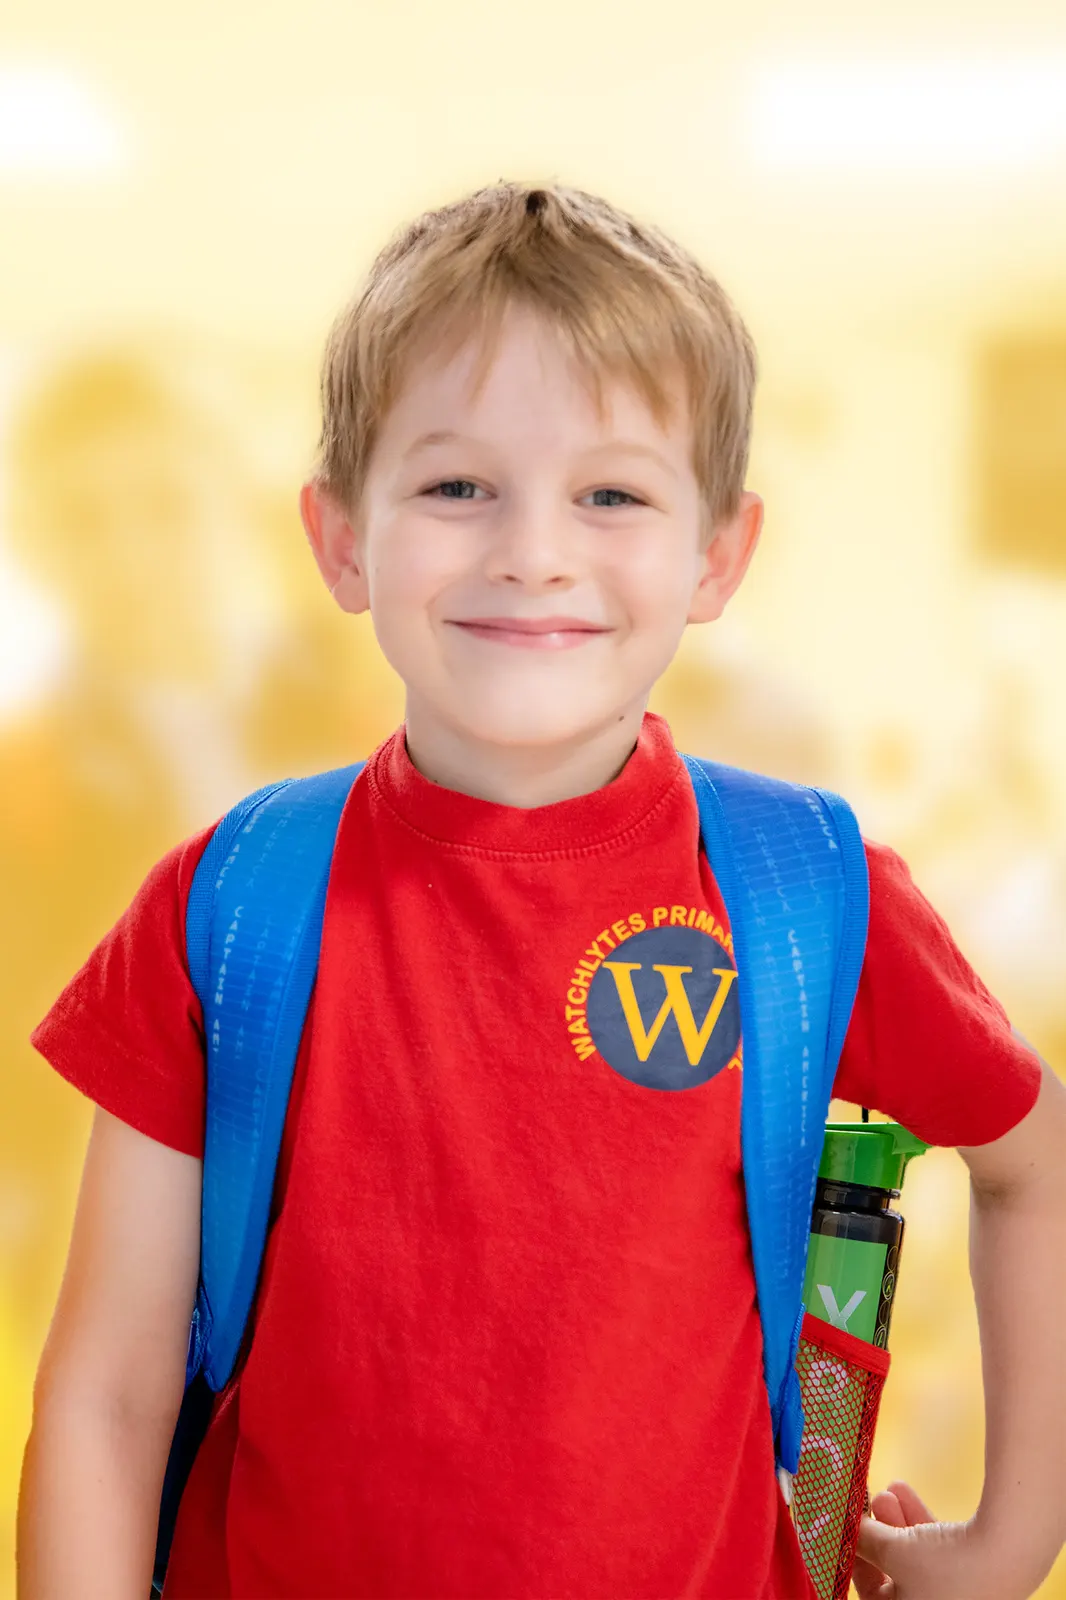 WLS Portrait Photo - Boy in red T-Shirt smiling to camera